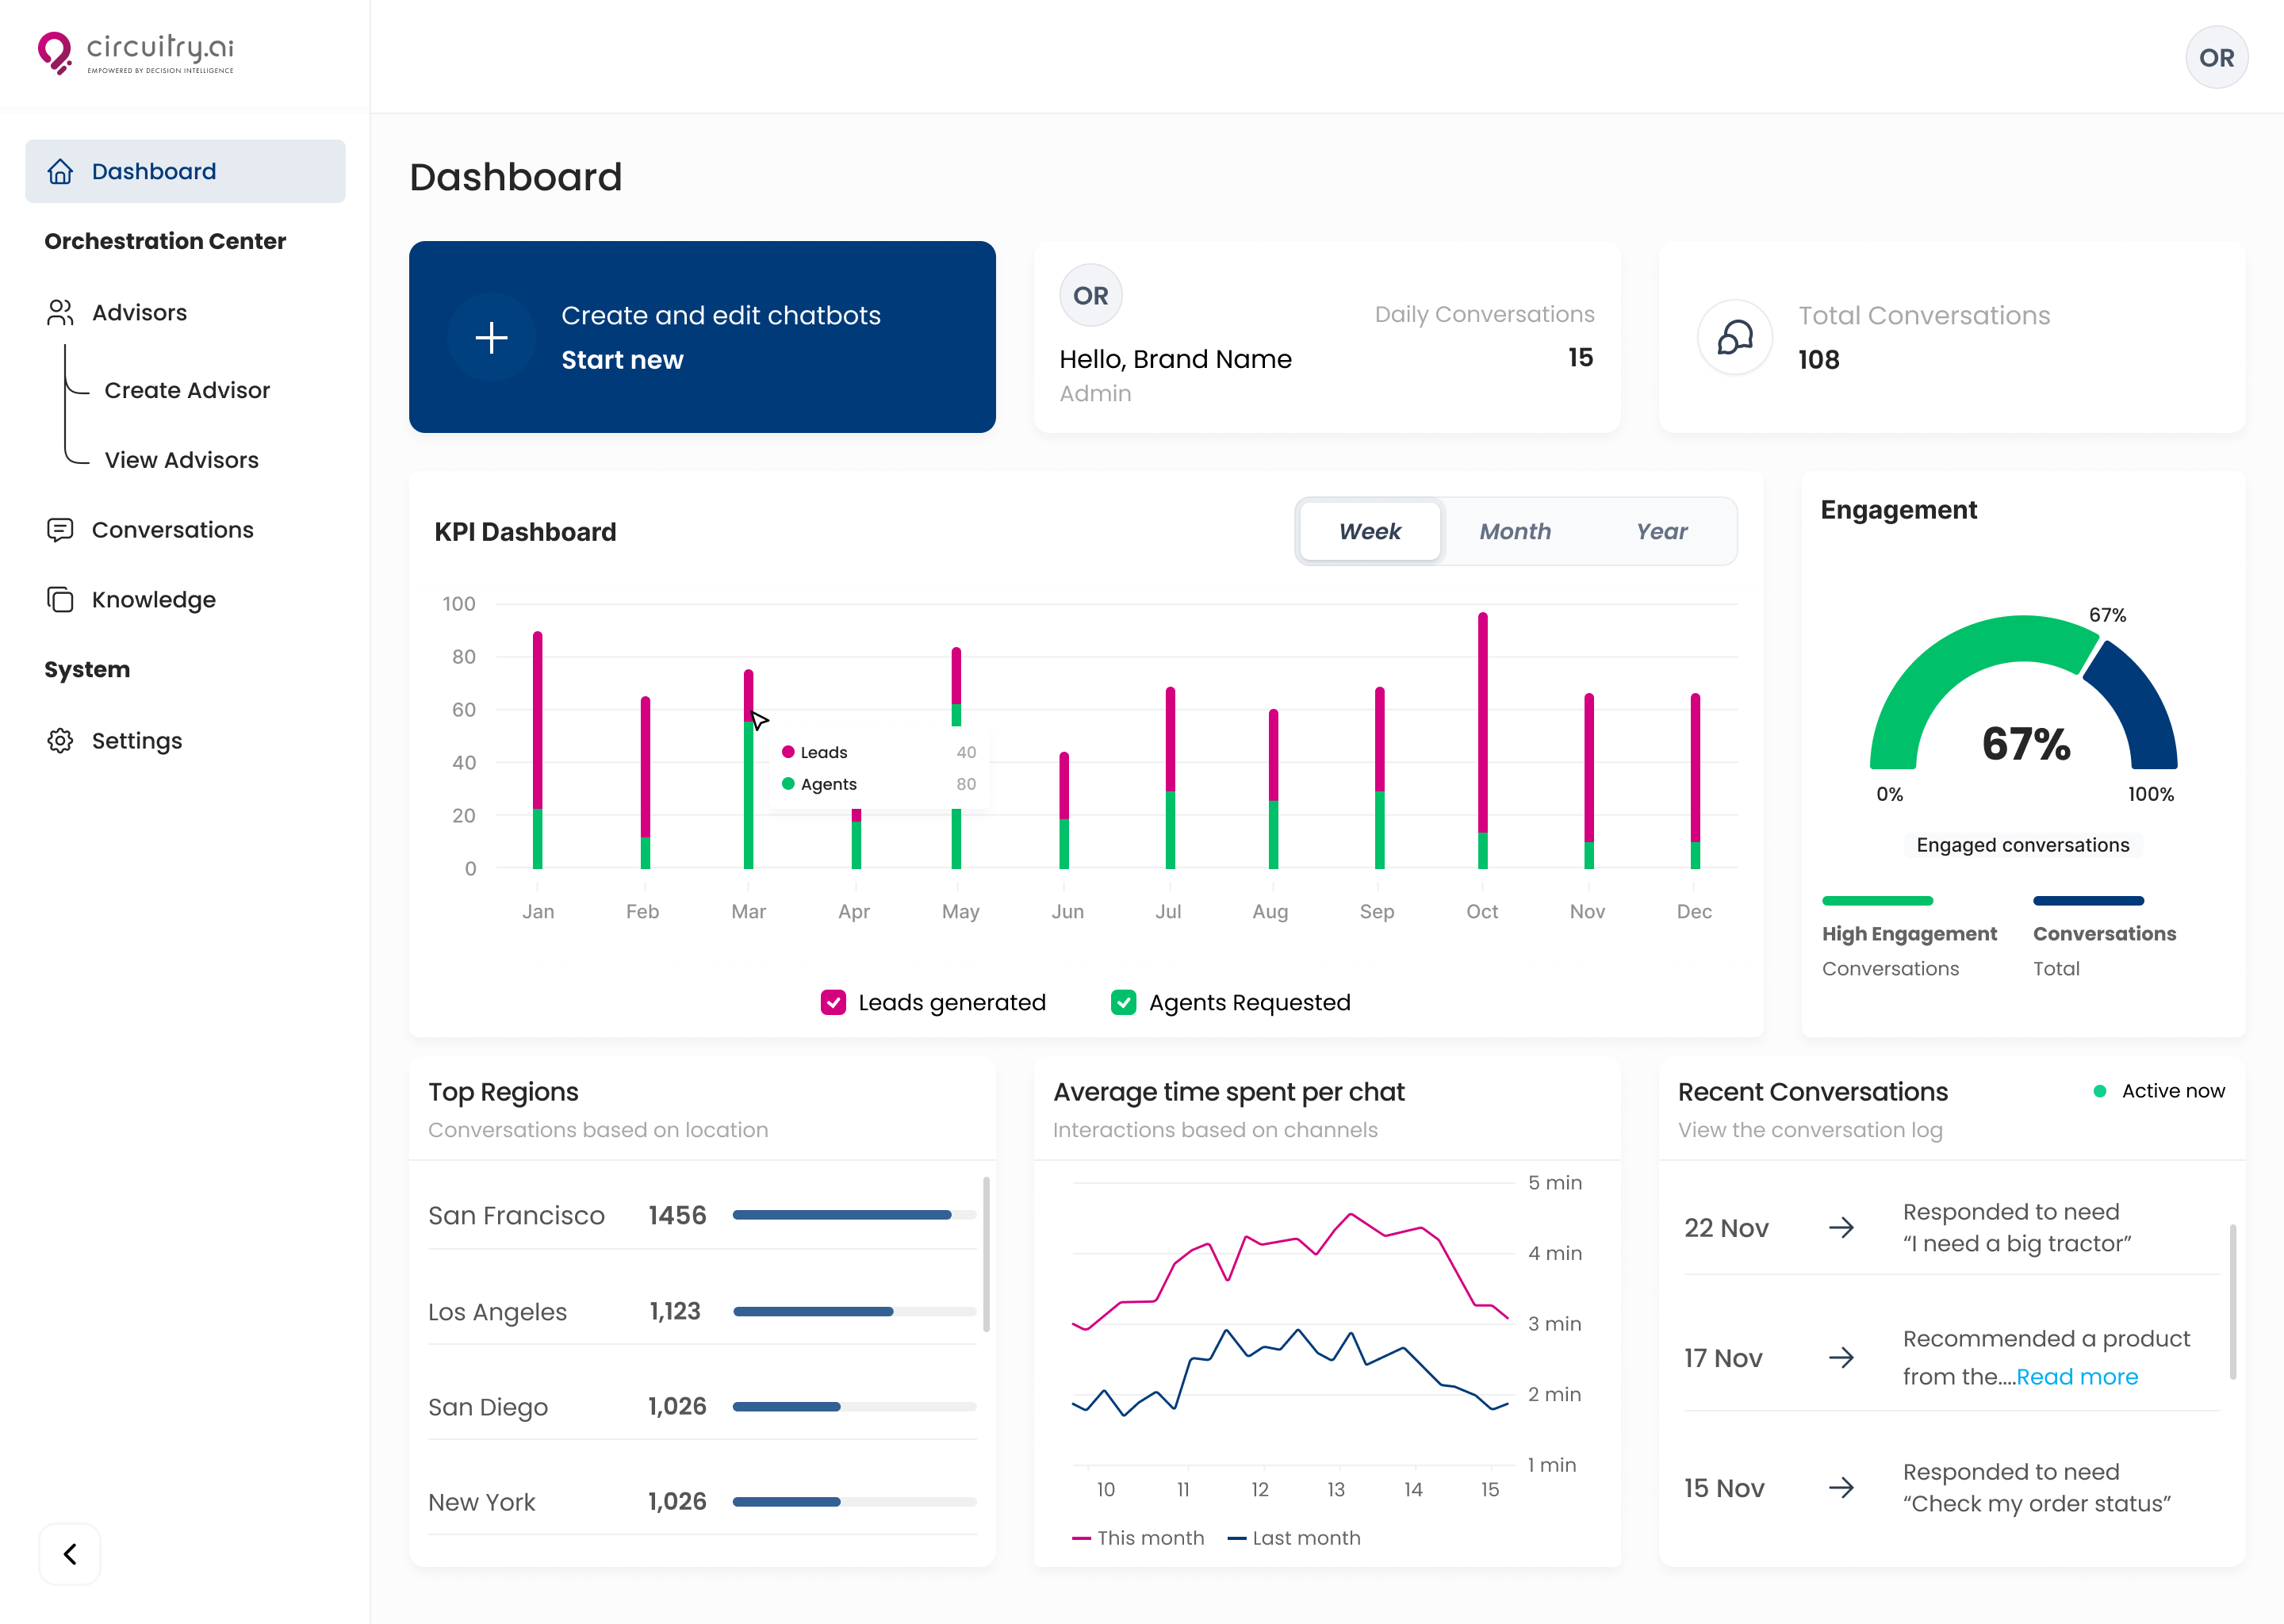 The Circuitry.ai dashboard that provides insights into all key metrics and KPIs.